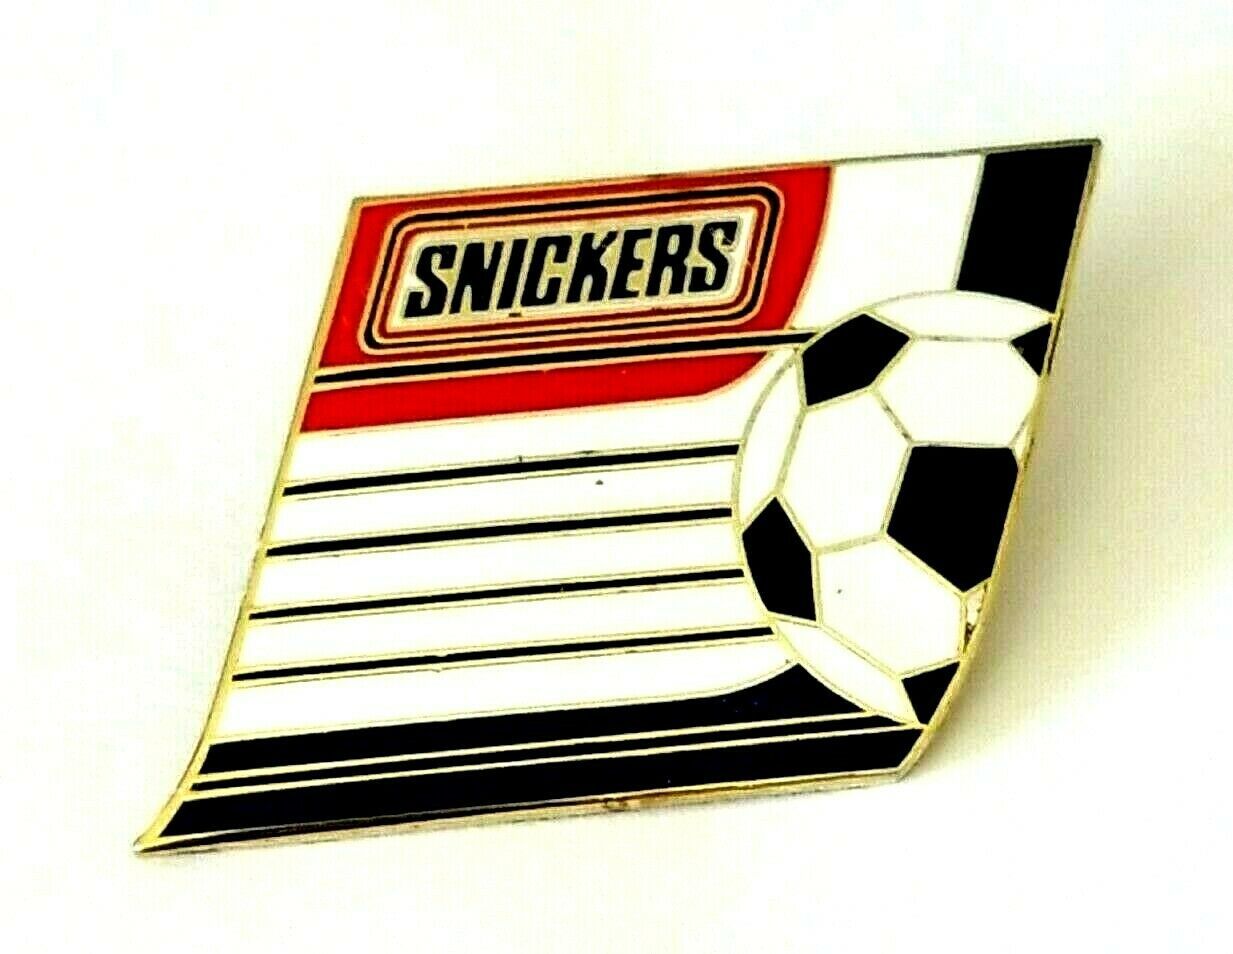 Primary image for 1998 Mars Snickers Chocolate Bar Soccer Ball Enamel Lapel Pin Sports Advertise